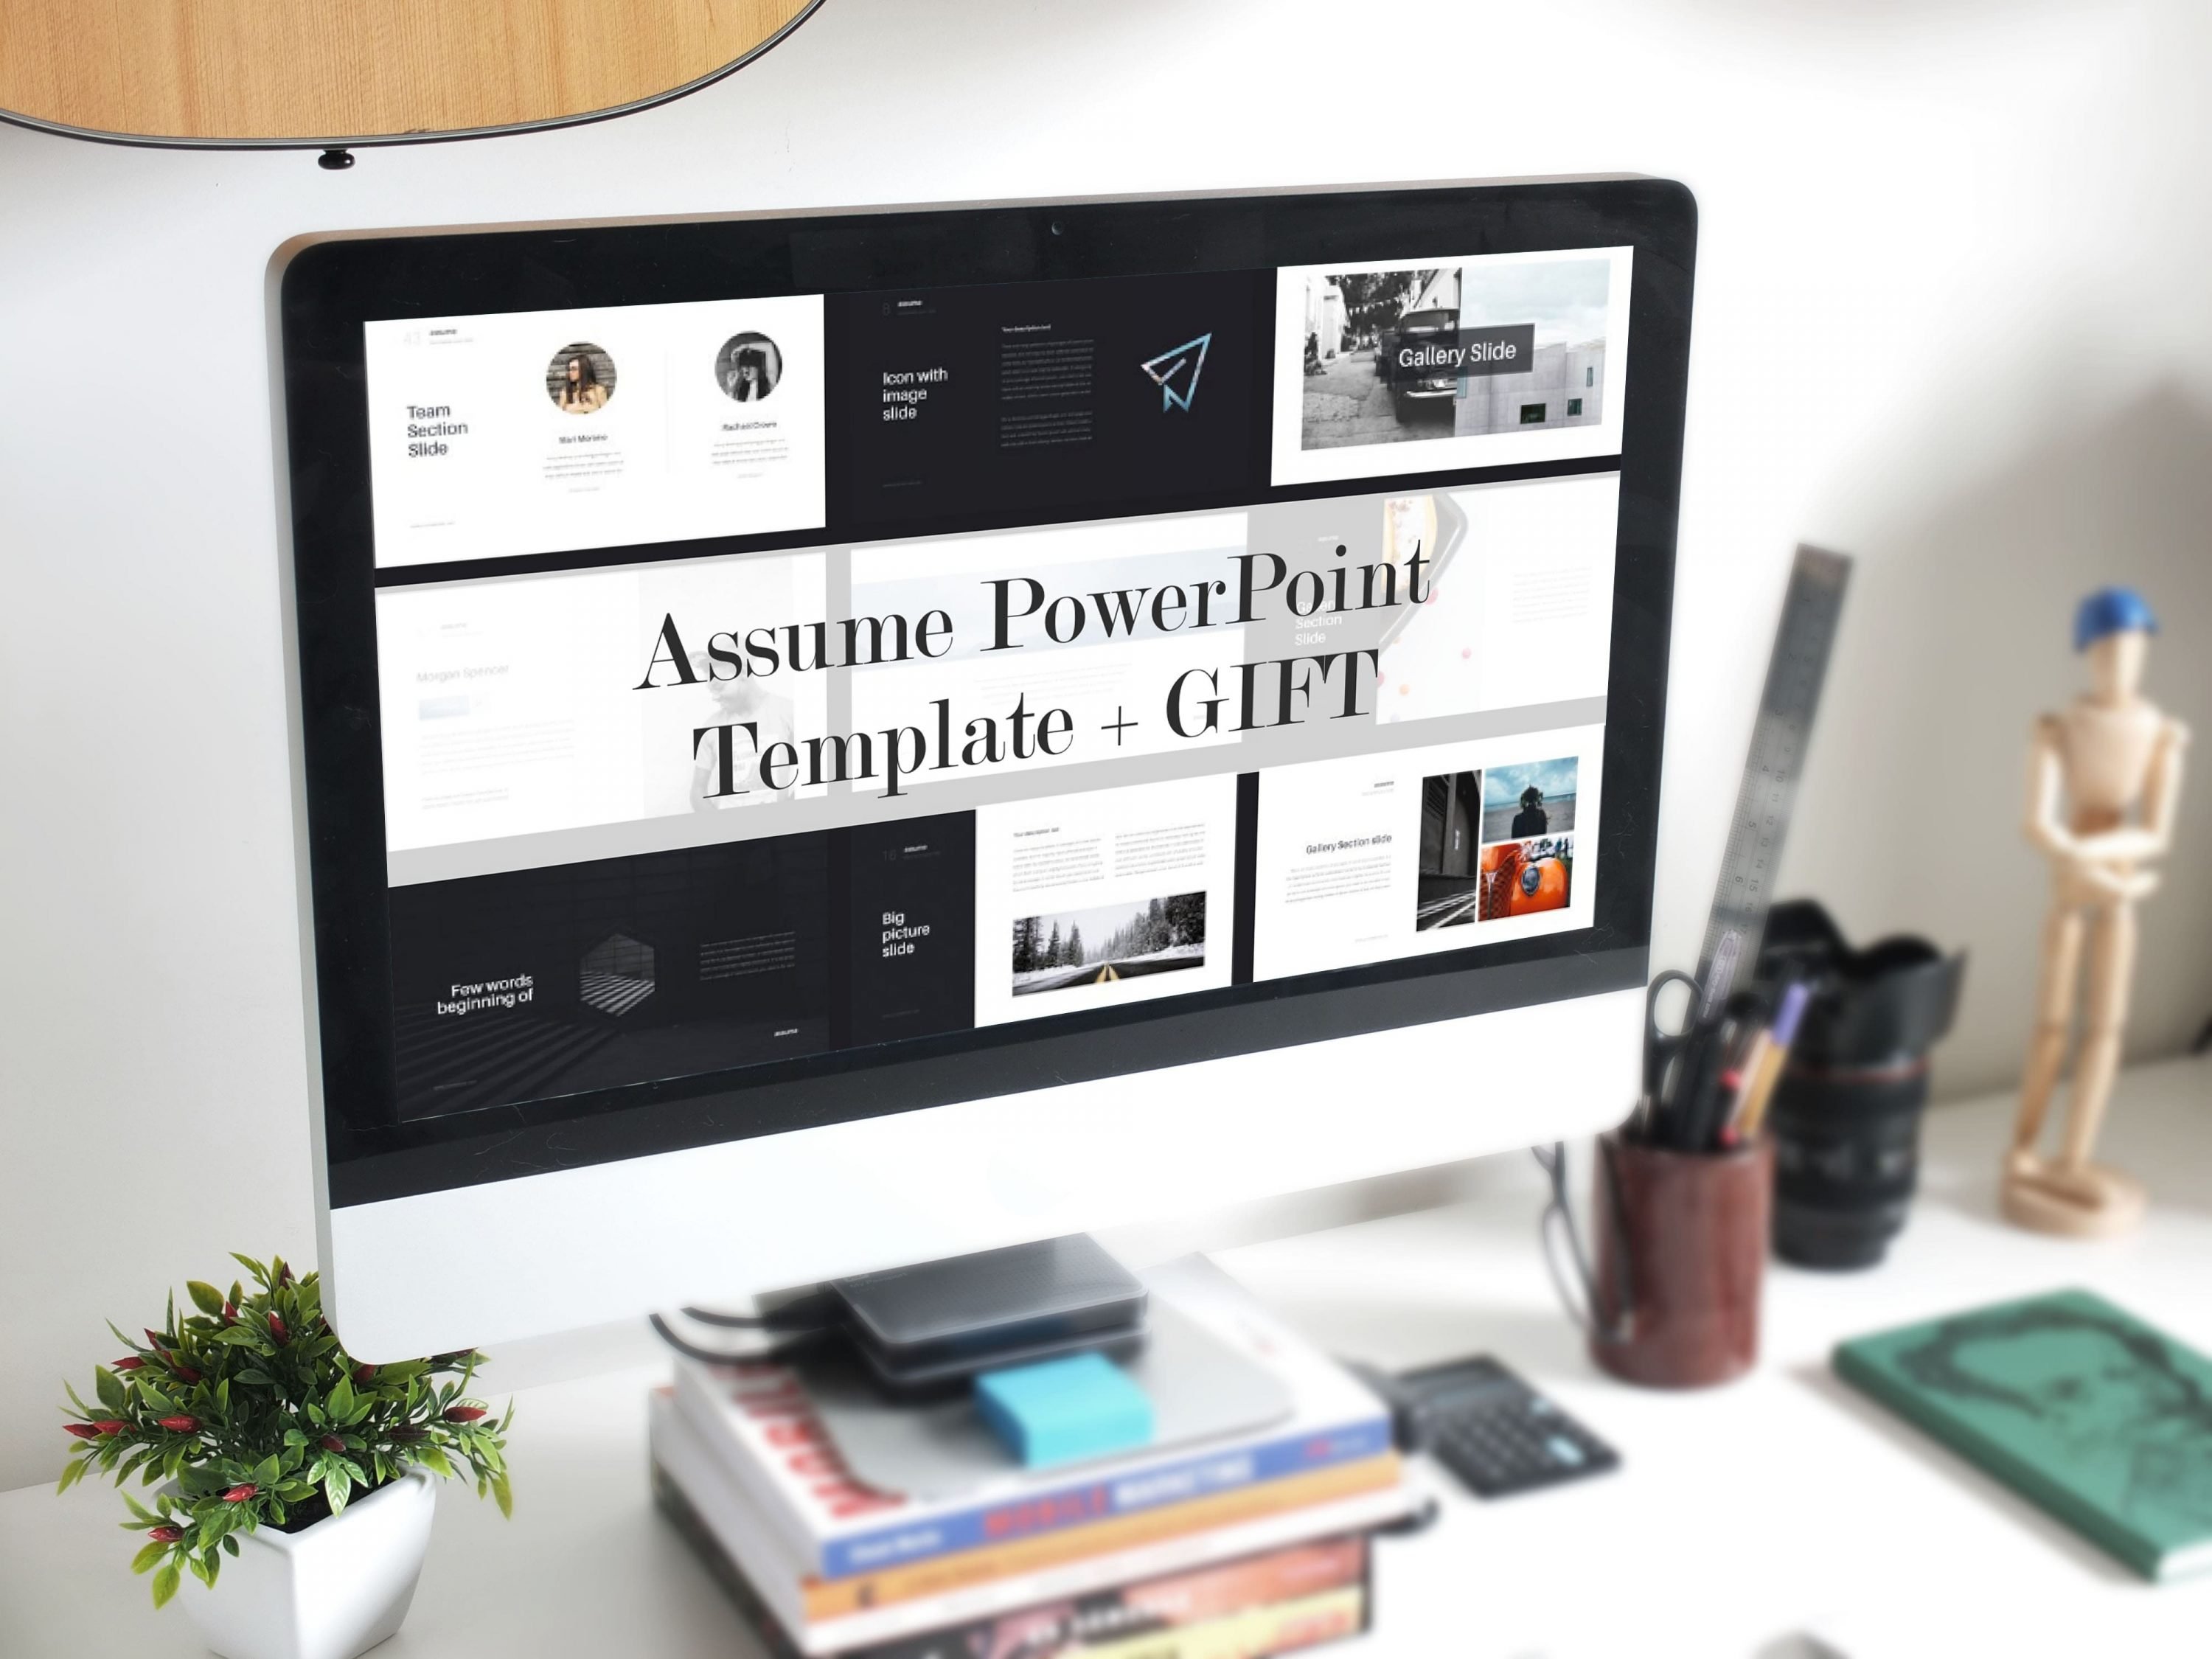 Desktop option of the Assume PowerPoint Template + GIFT.